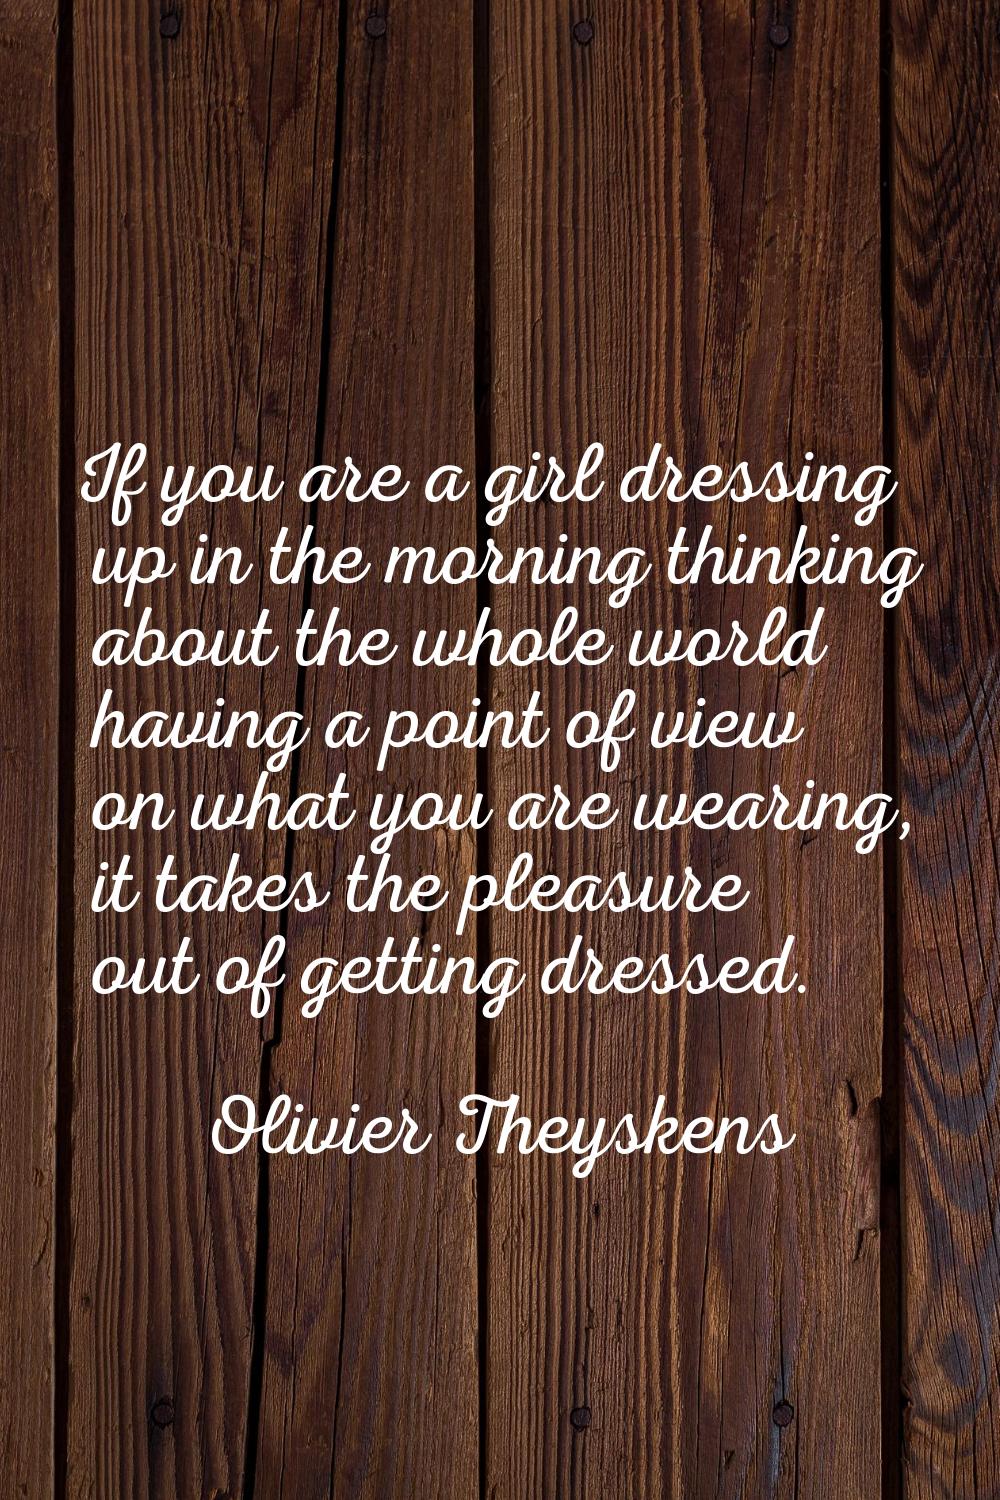 If you are a girl dressing up in the morning thinking about the whole world having a point of view 